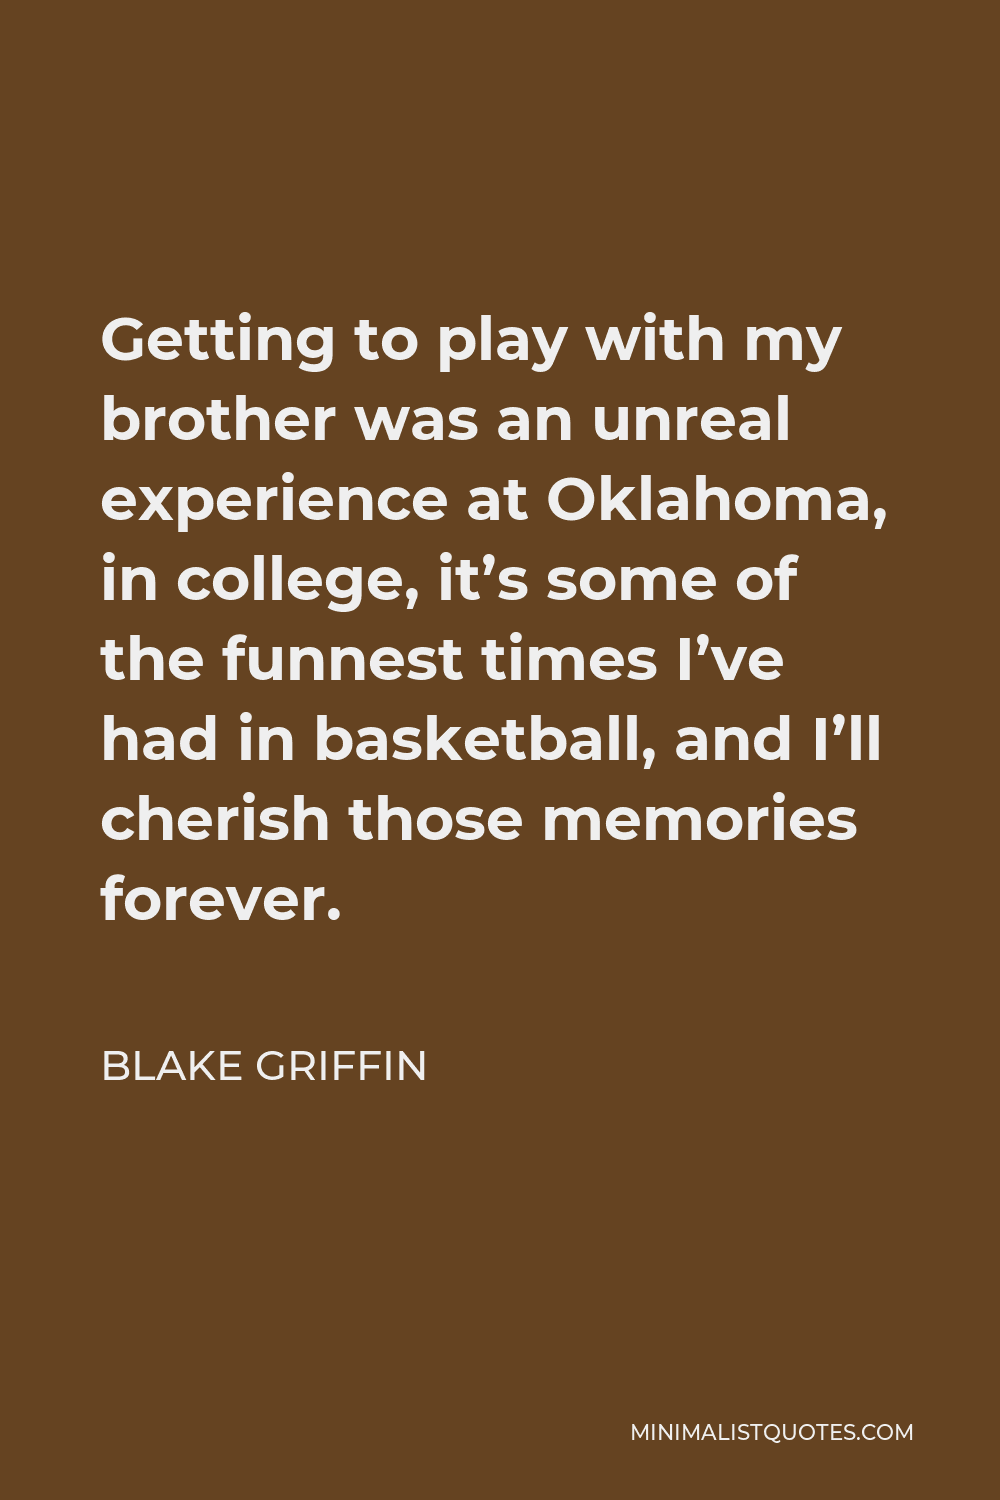 Blake Griffin Quote - Getting to play with my brother was an unreal experience at Oklahoma, in college, it’s some of the funnest times I’ve had in basketball, and I’ll cherish those memories forever.